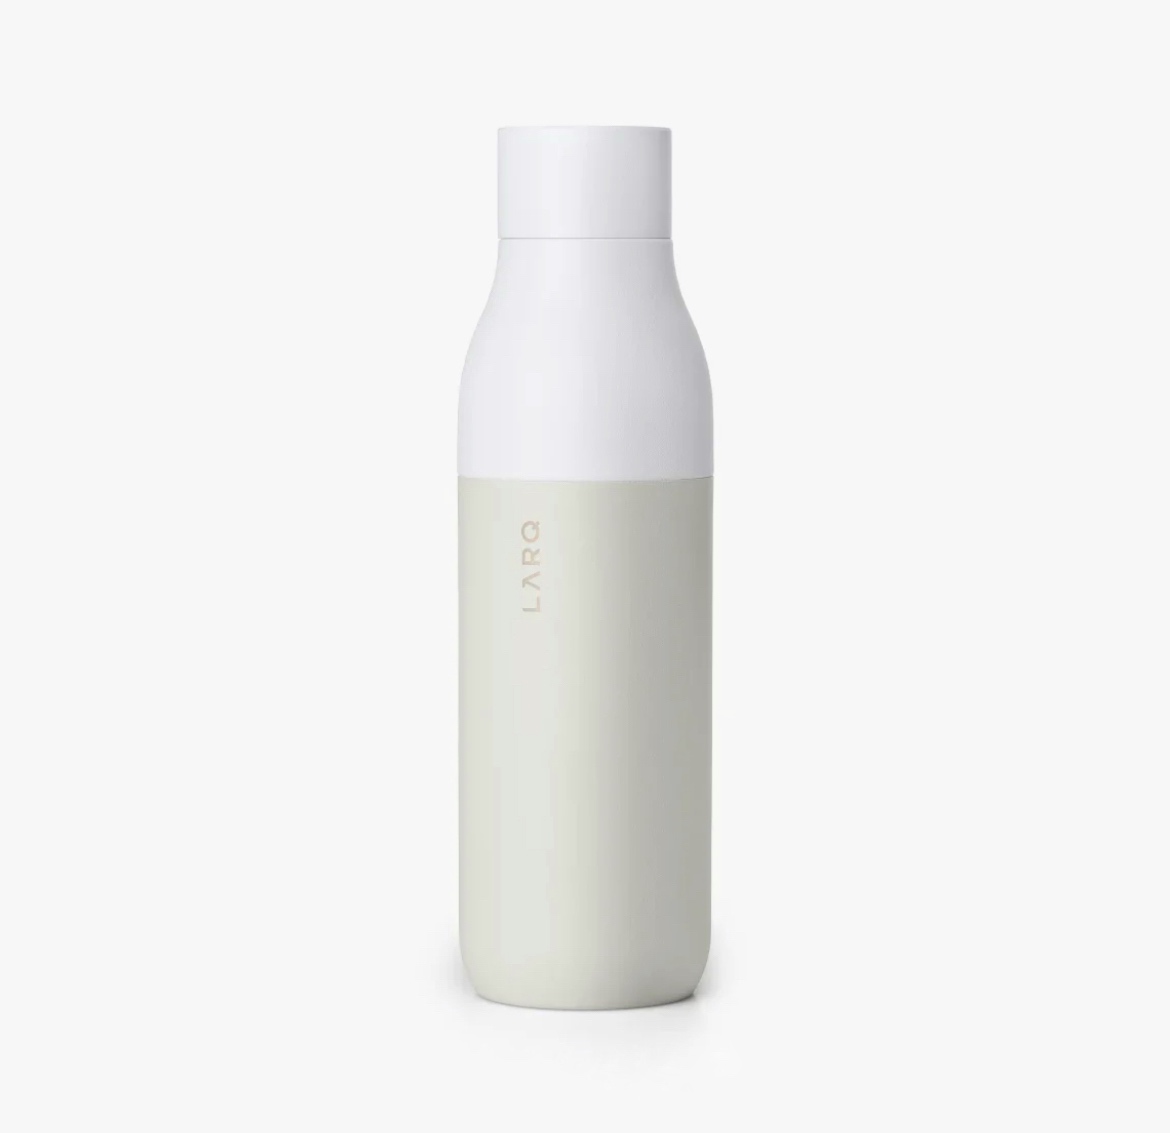 Double insulated self cleaning filtering LARQ water bottle